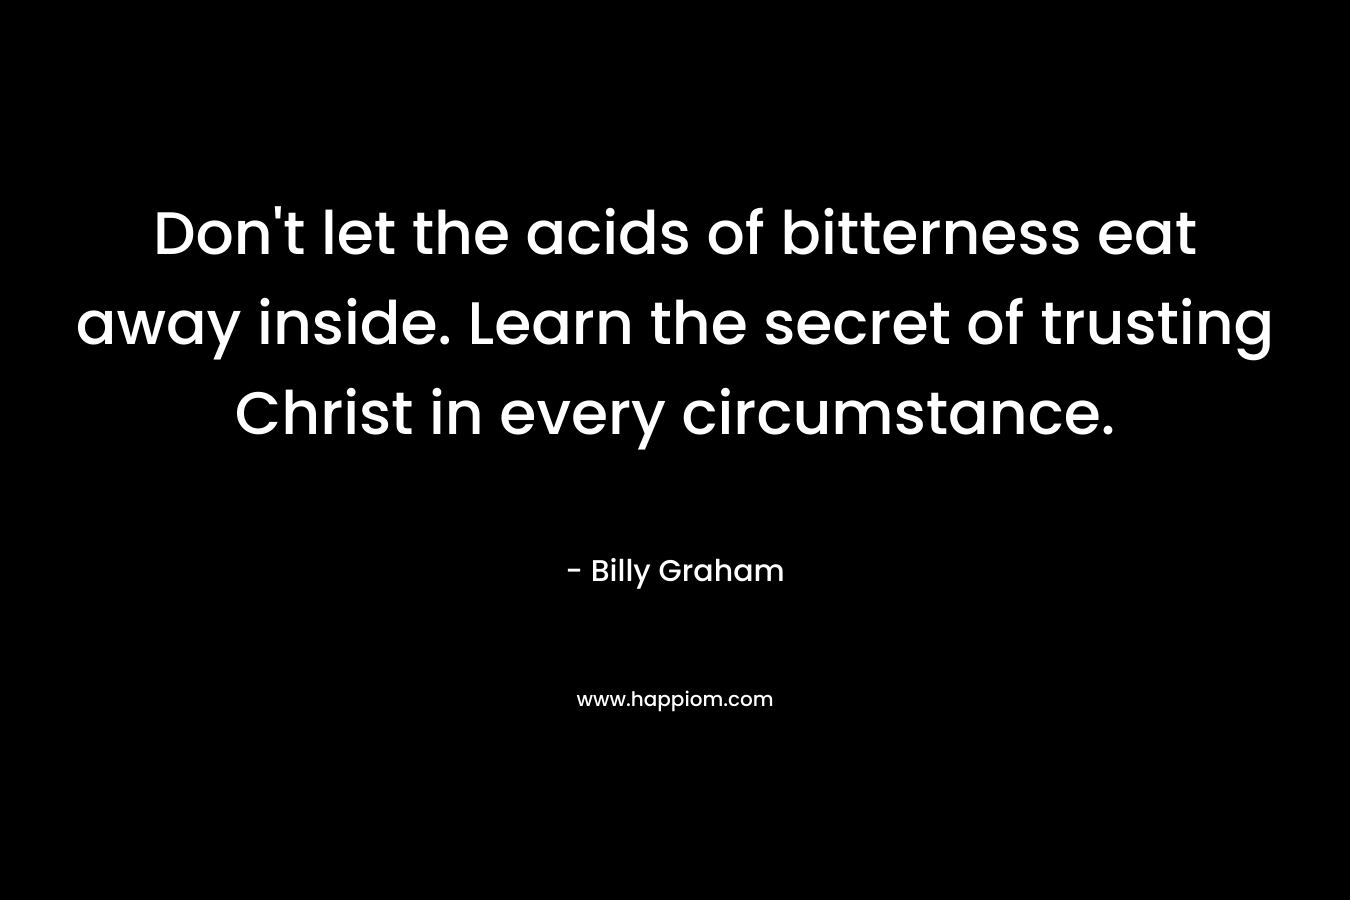 Don’t let the acids of bitterness eat away inside. Learn the secret of trusting Christ in every circumstance. – Billy Graham